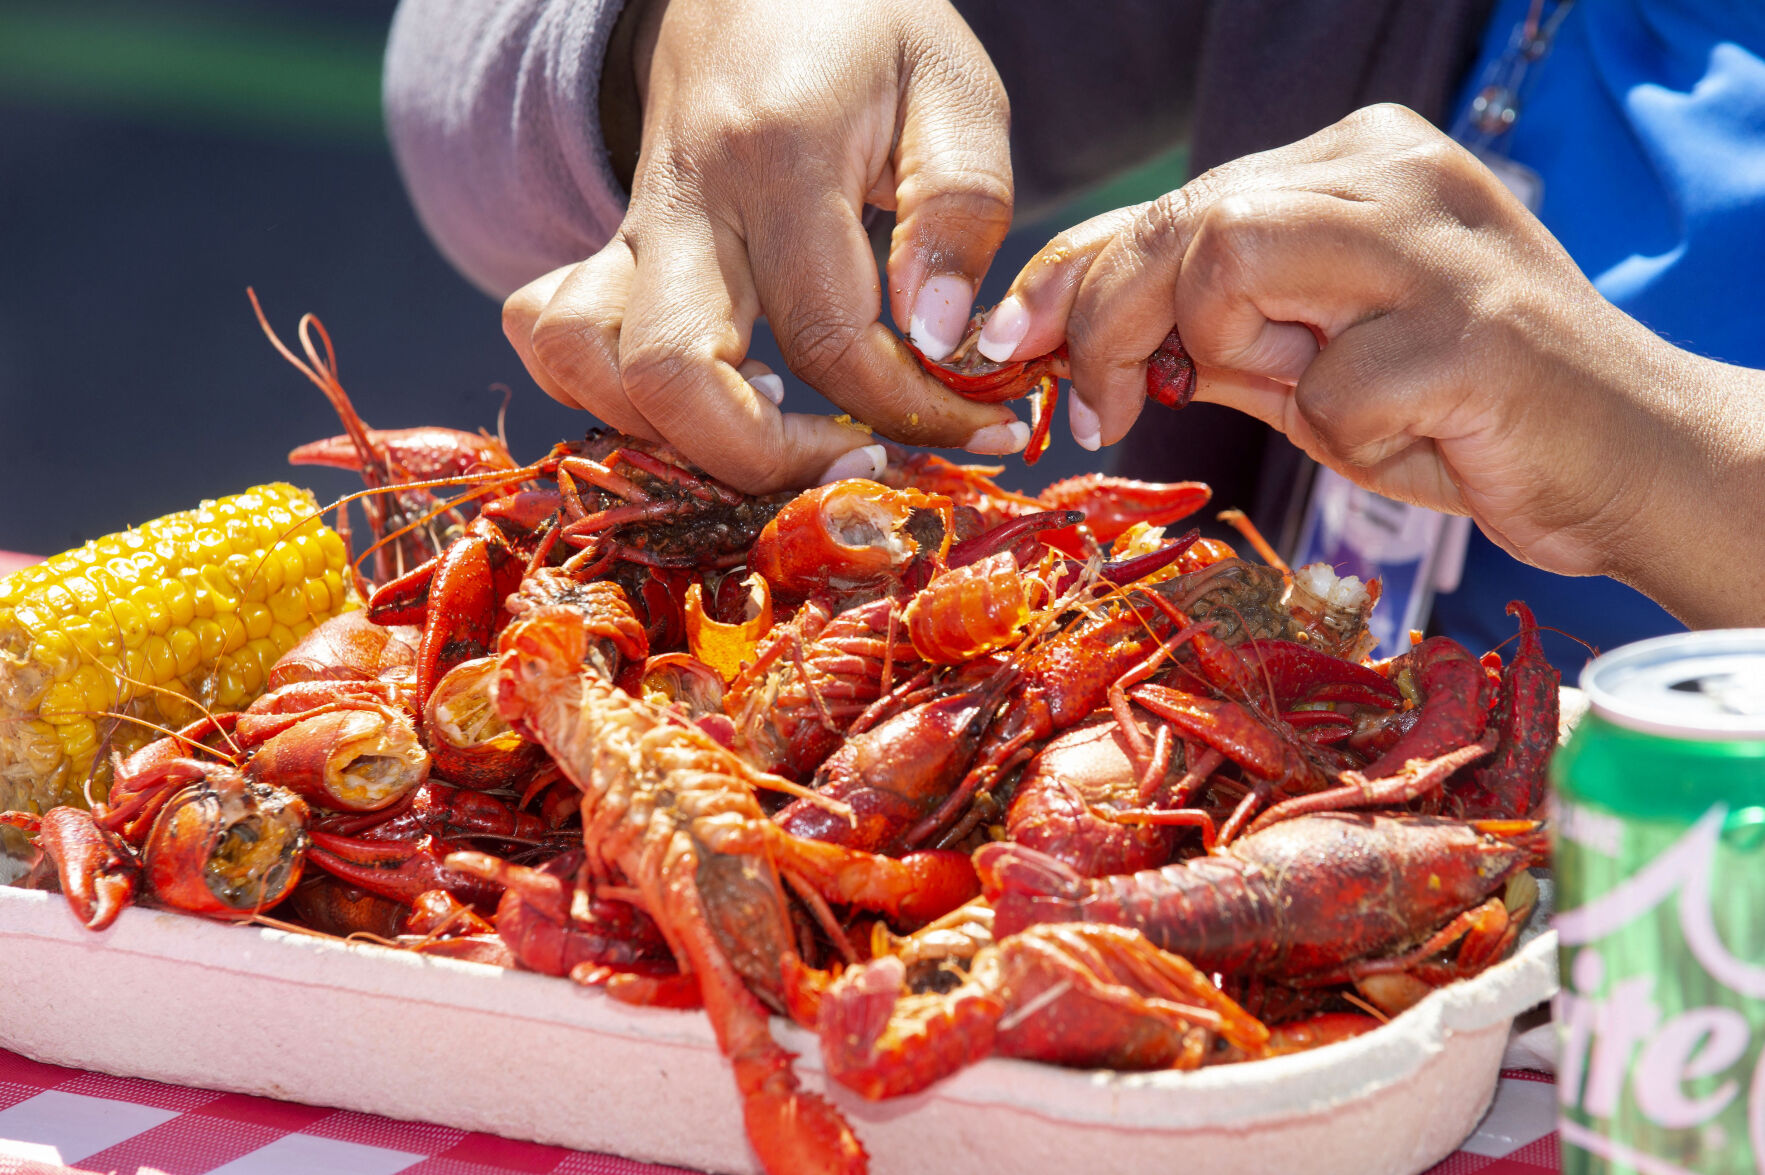 Where to Go, What to Eat 30 teams to compete in Crawfish King Cookoff